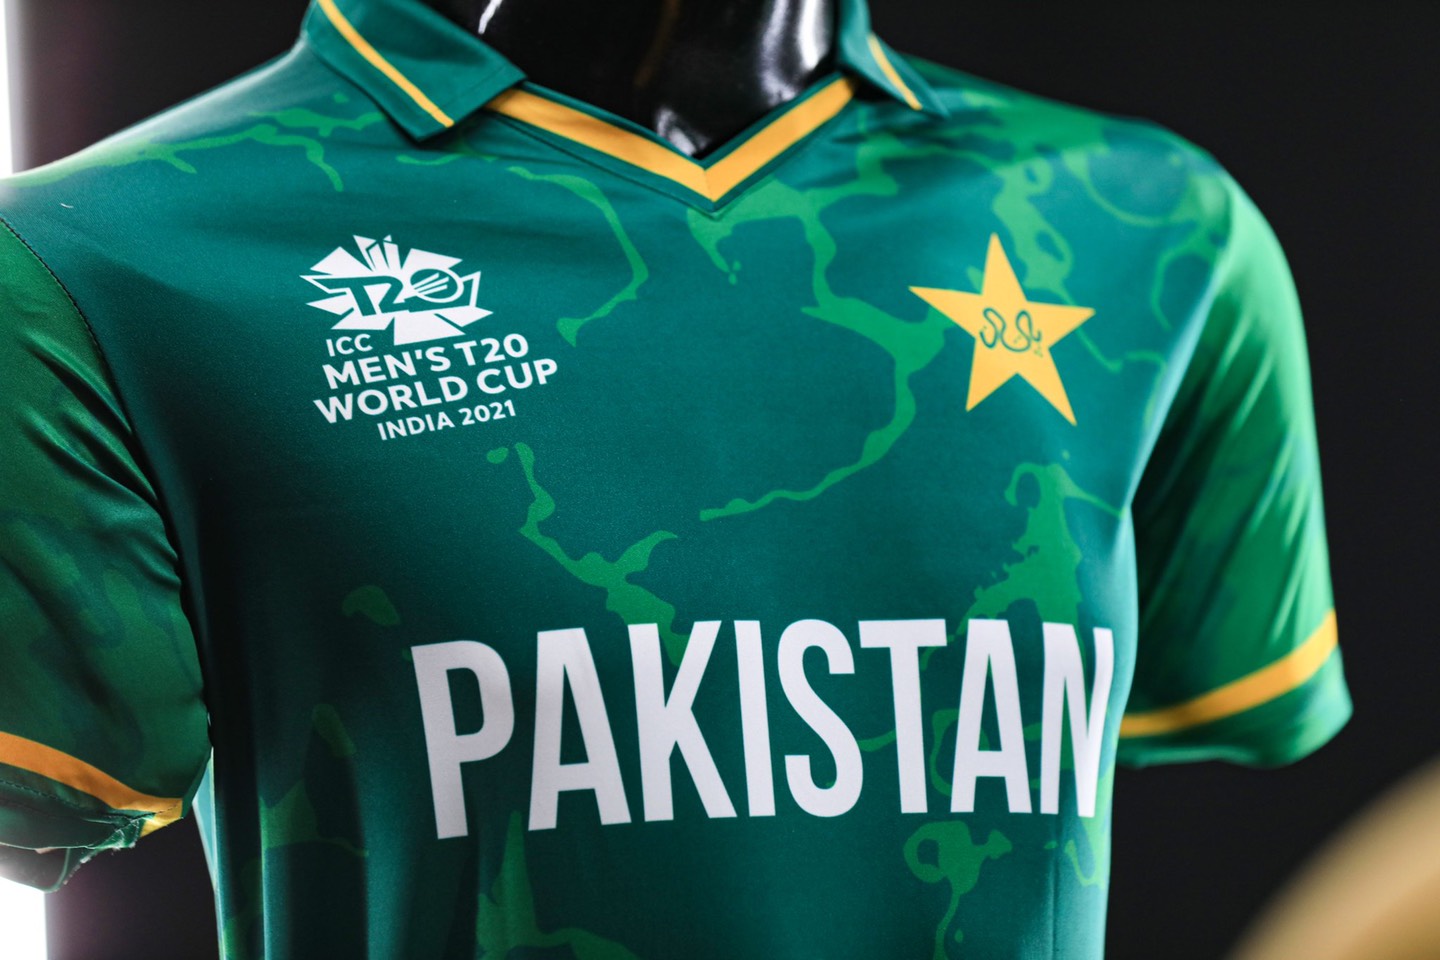 Pakistan cricket team's jersey for the T20 World Cup | PCB/Twitter